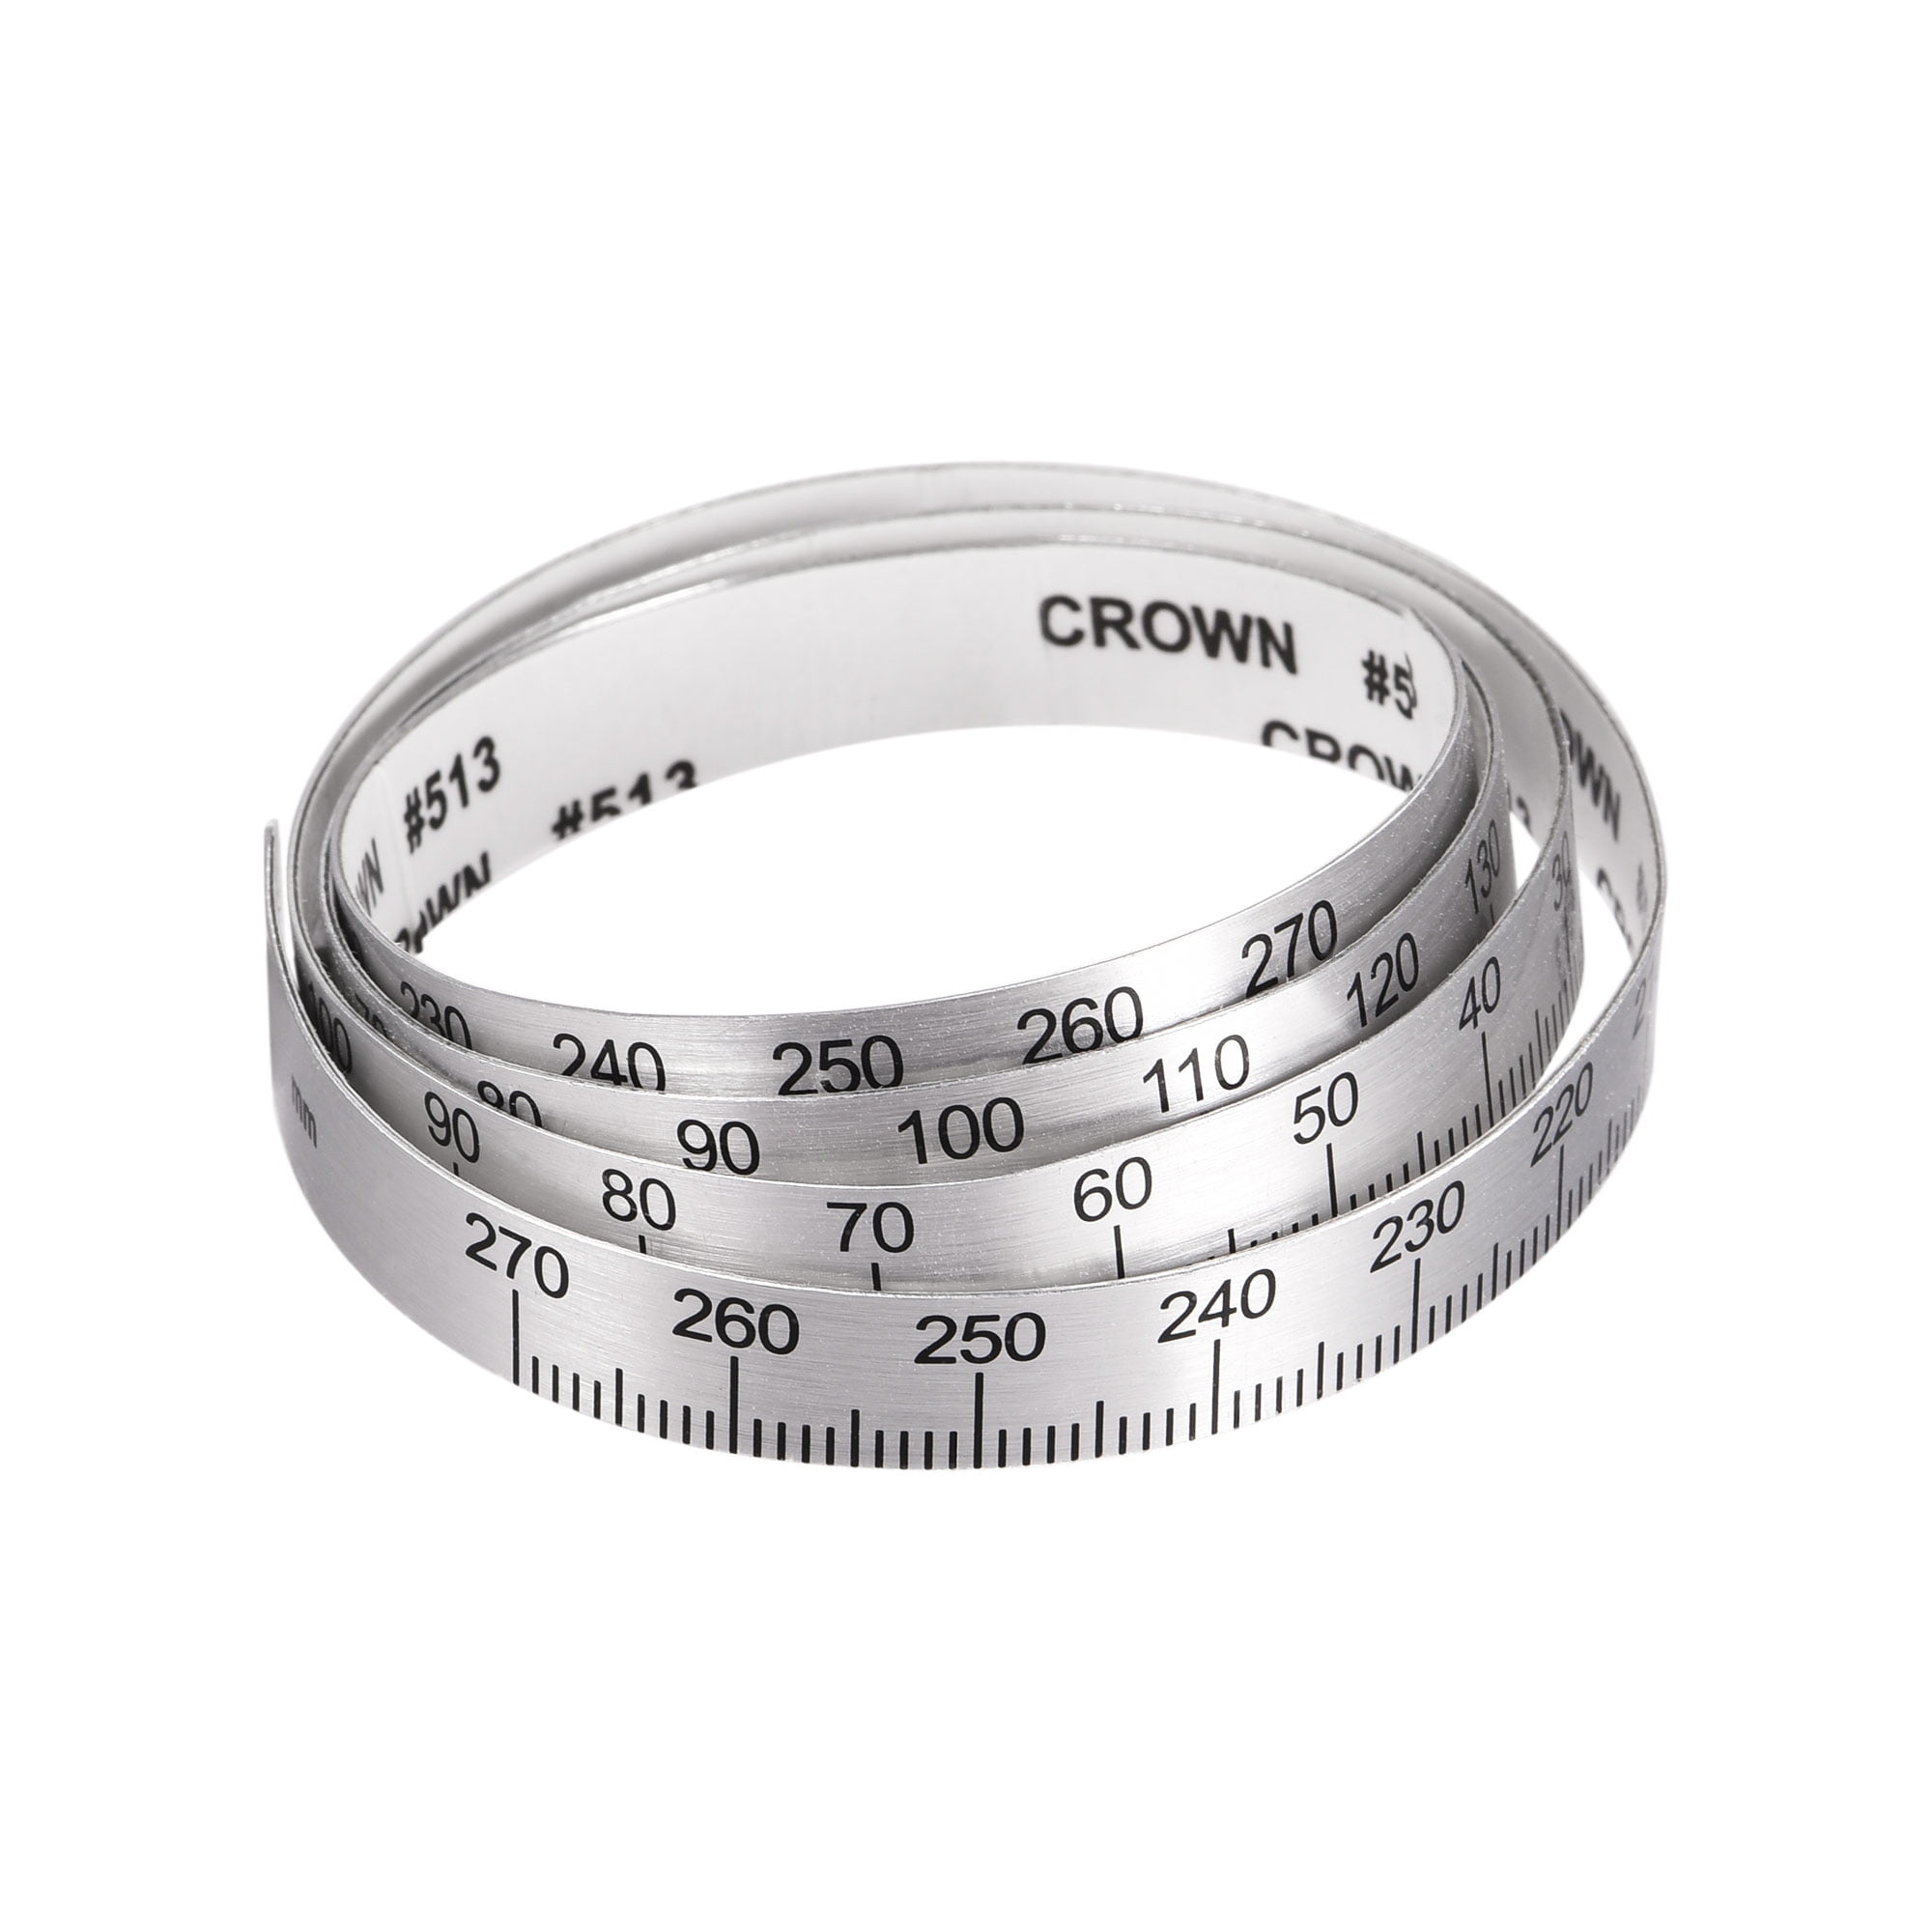 Aluminum Center Finding Ruler 10-inch Adhesive Tape Measure, (from the  middle). - Silver Tone - Bed Bath & Beyond - 33625721